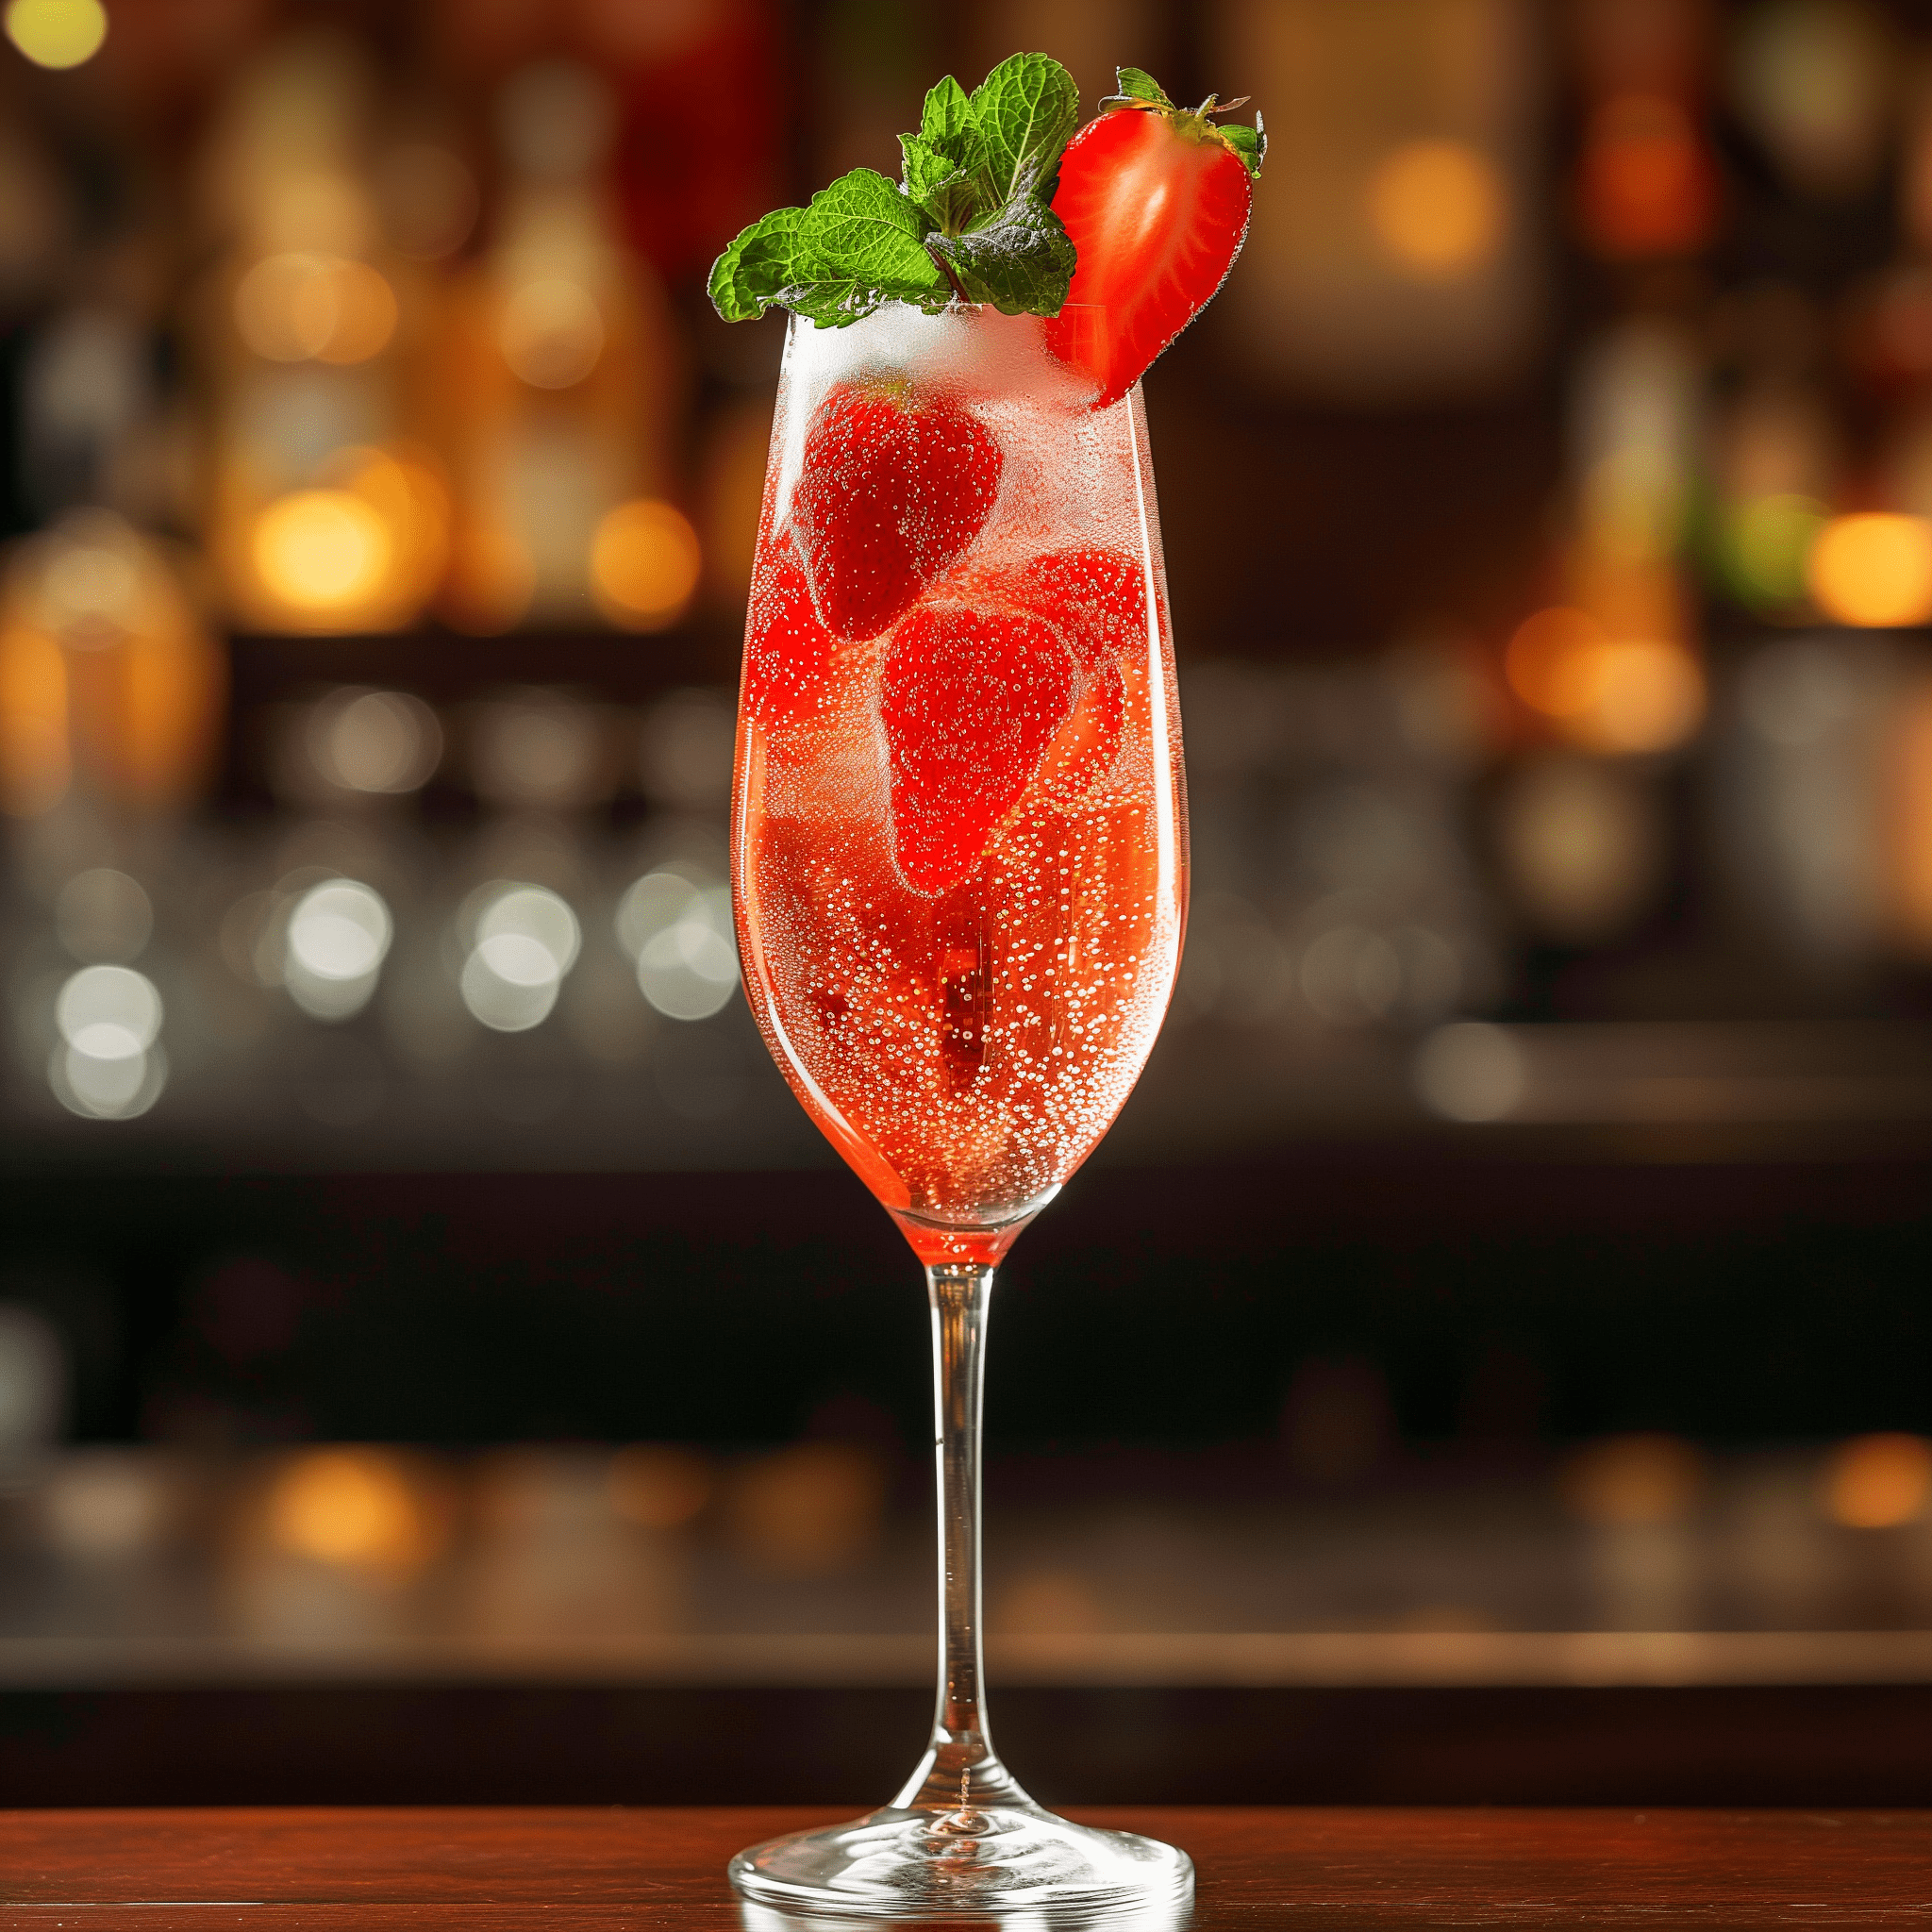 Strawberry Spritz Mocktail Recipe - The Strawberry Spritz Mocktail is a harmonious blend of sweet and tangy flavors. The strawberries provide a juicy, ripe sweetness that's perfectly balanced by the zesty acidity of the citrus. The sparkling water adds a fizzy, refreshing element that makes the drink light and effervescent, while the hint of mint gives it a cool, crisp finish.